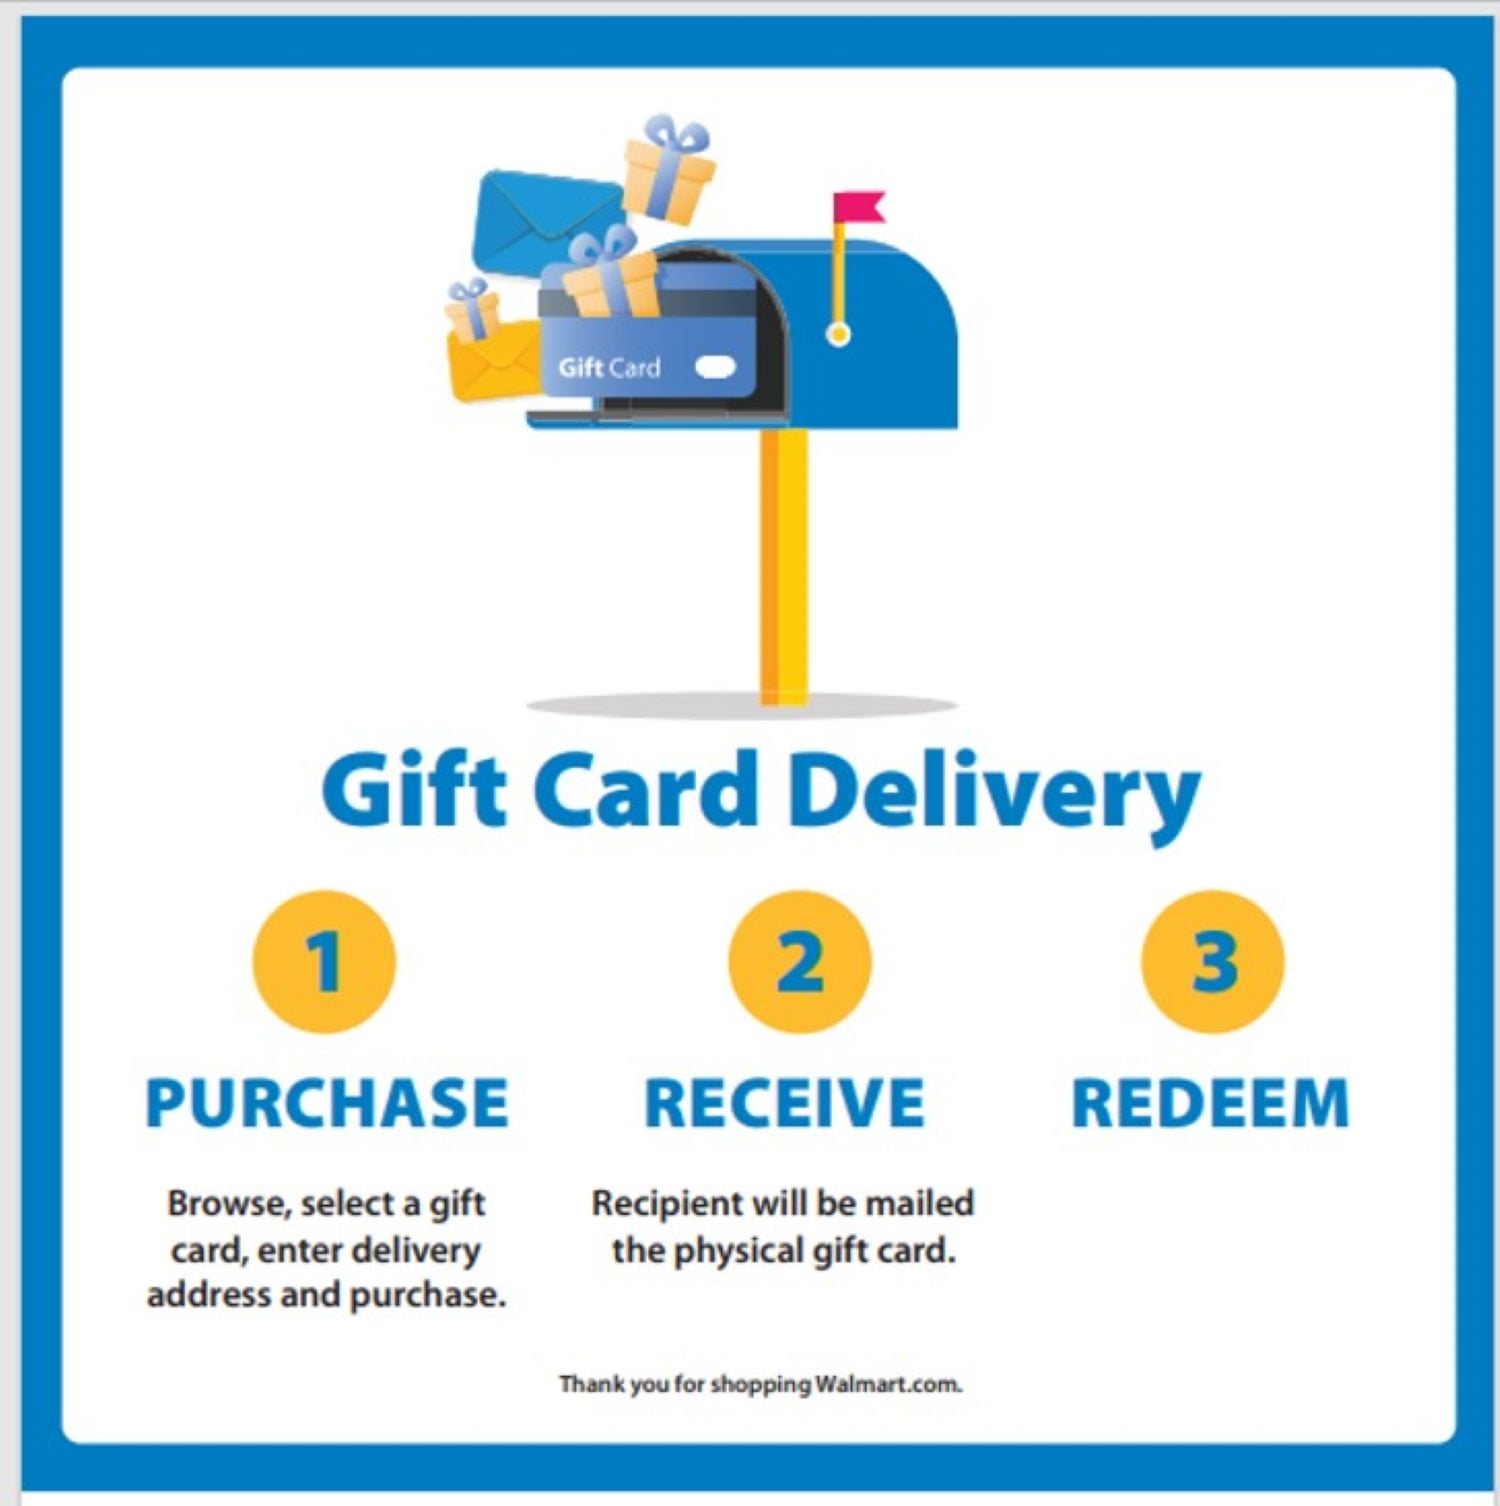 How To Perform a Darden Gift Card Balance Check FAST [Tips]